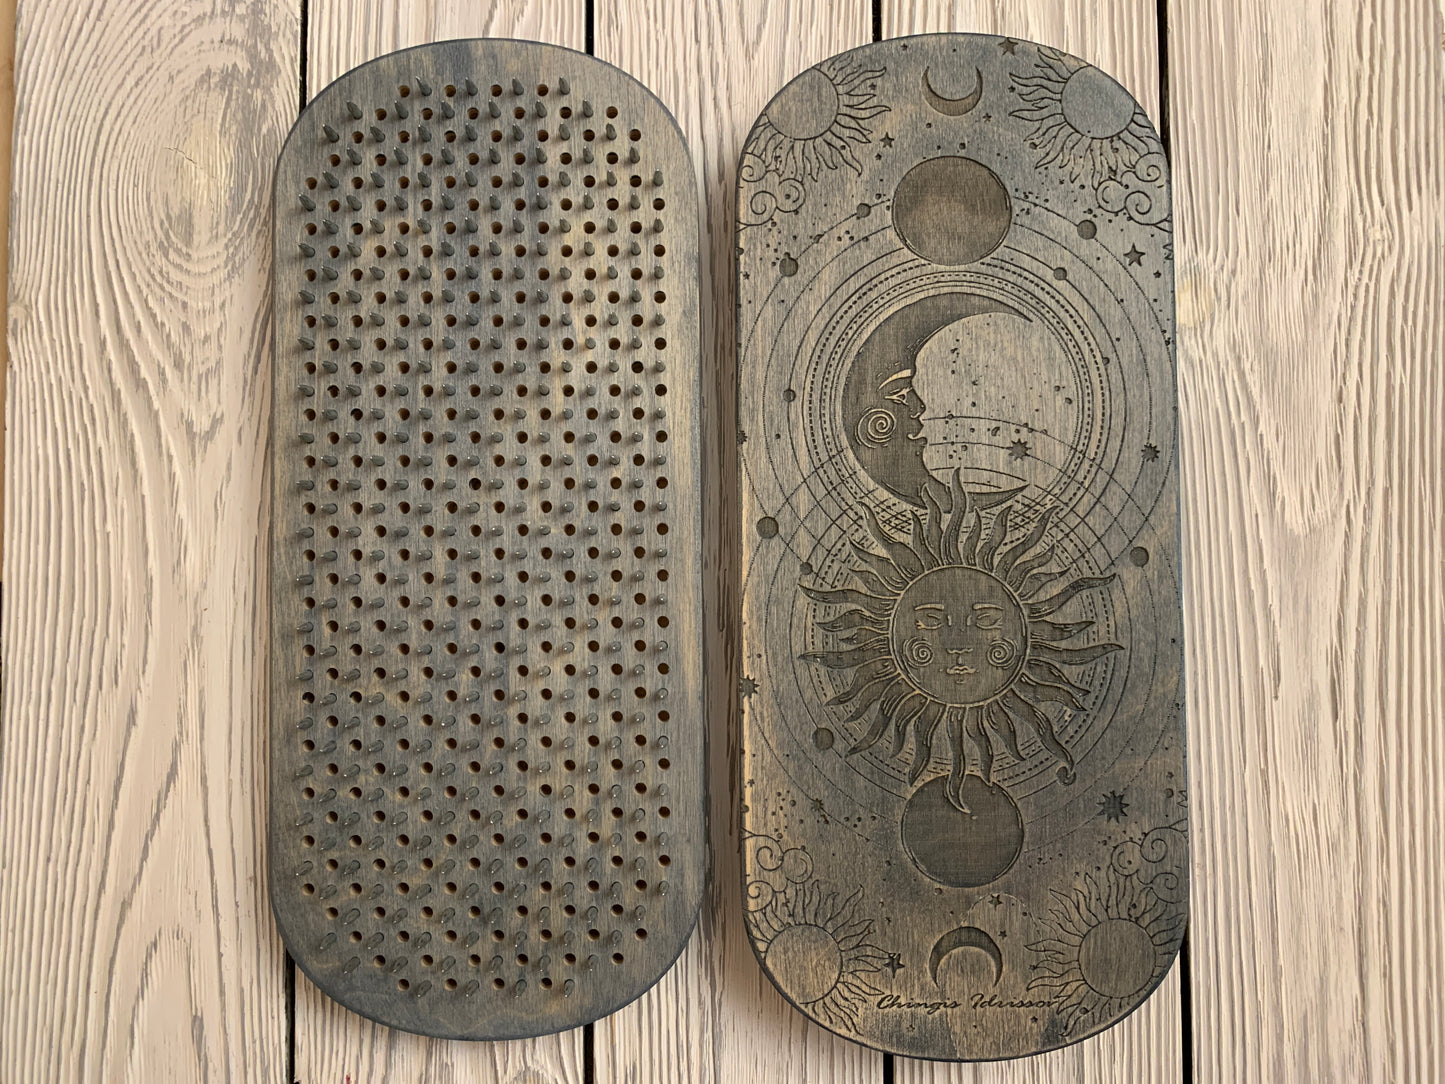 Sadhu board with Ballistic Nails bullets and forged steel. Sun and Moon, 10 mm